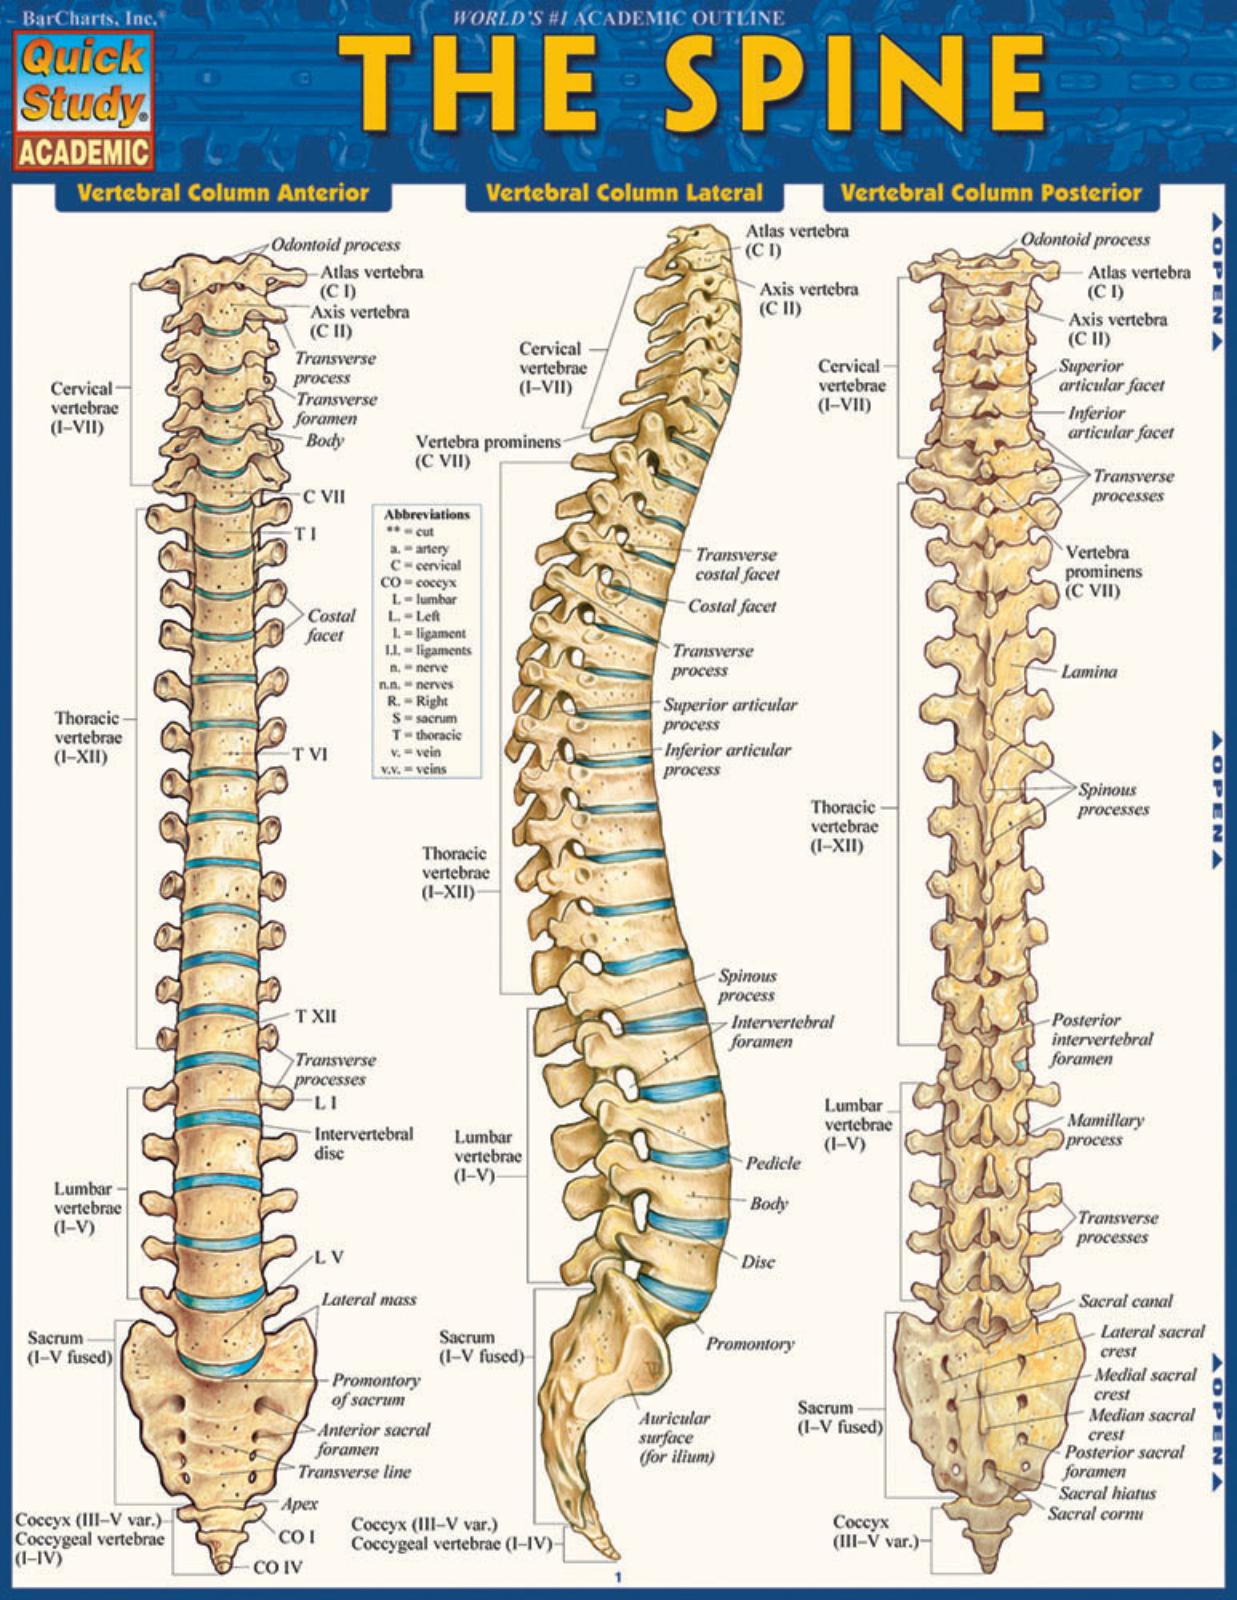 THE SPINE